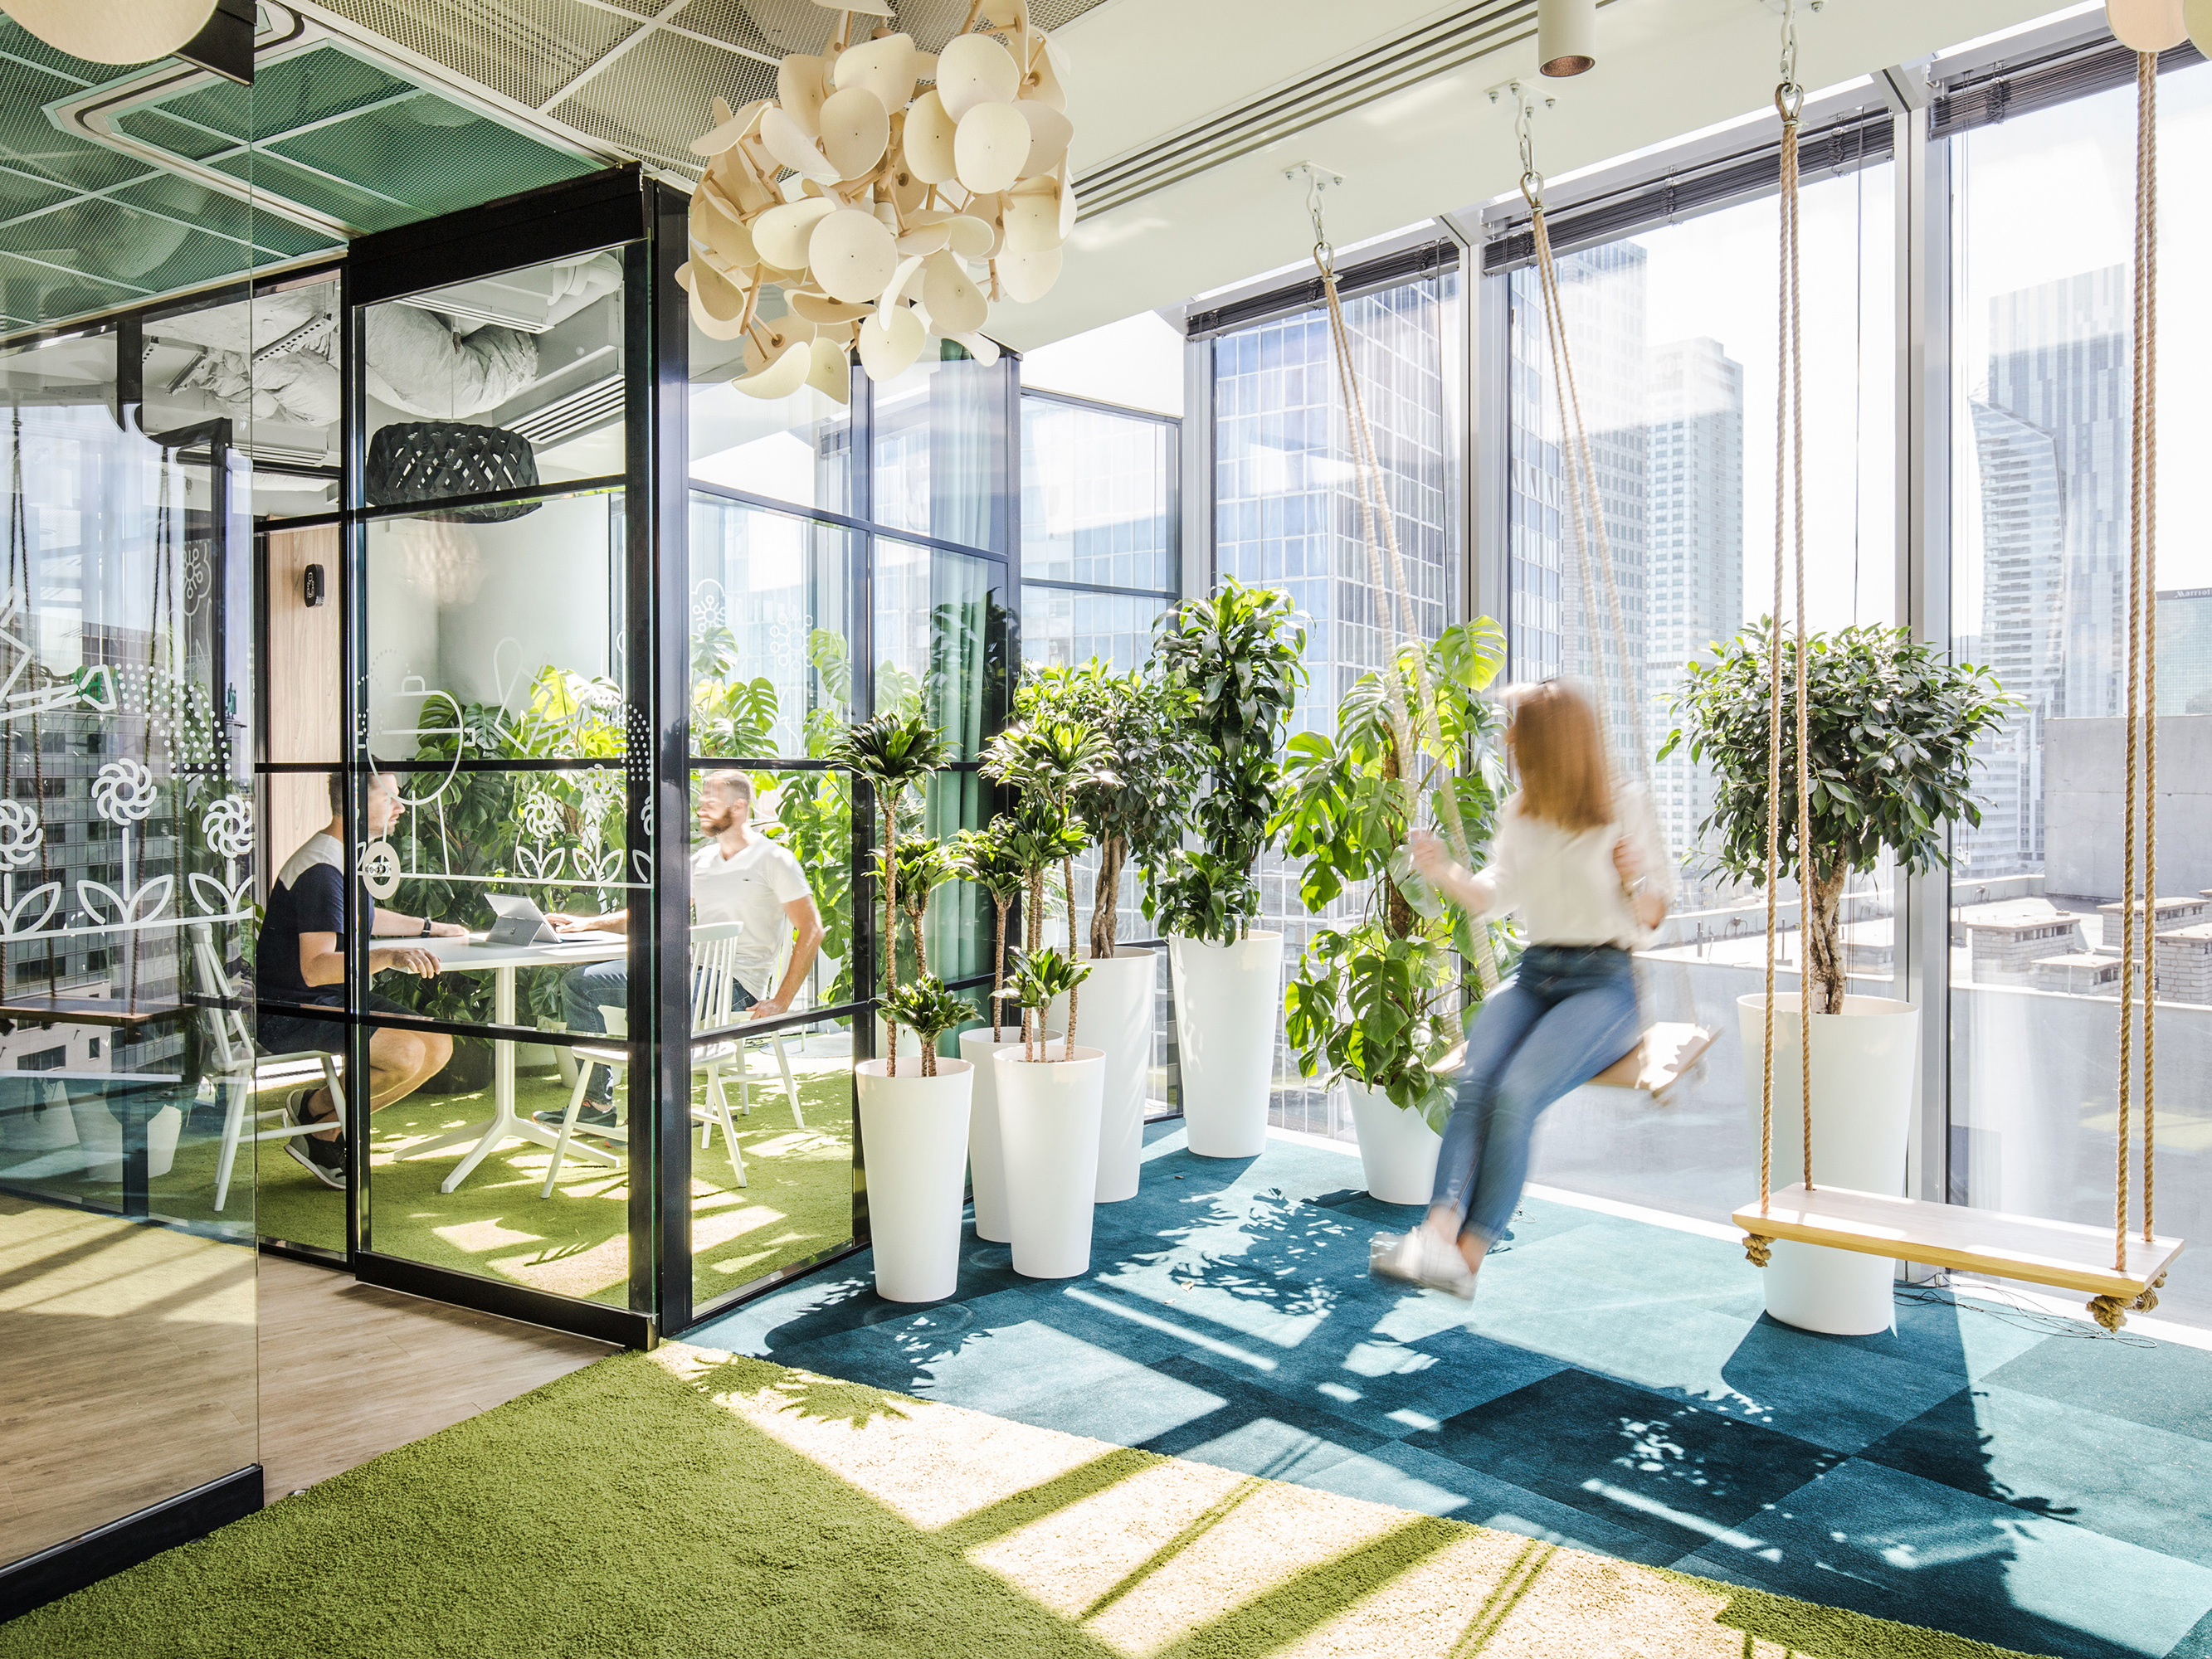 Biophilic design and IoT on the agenda at Facilities Expo